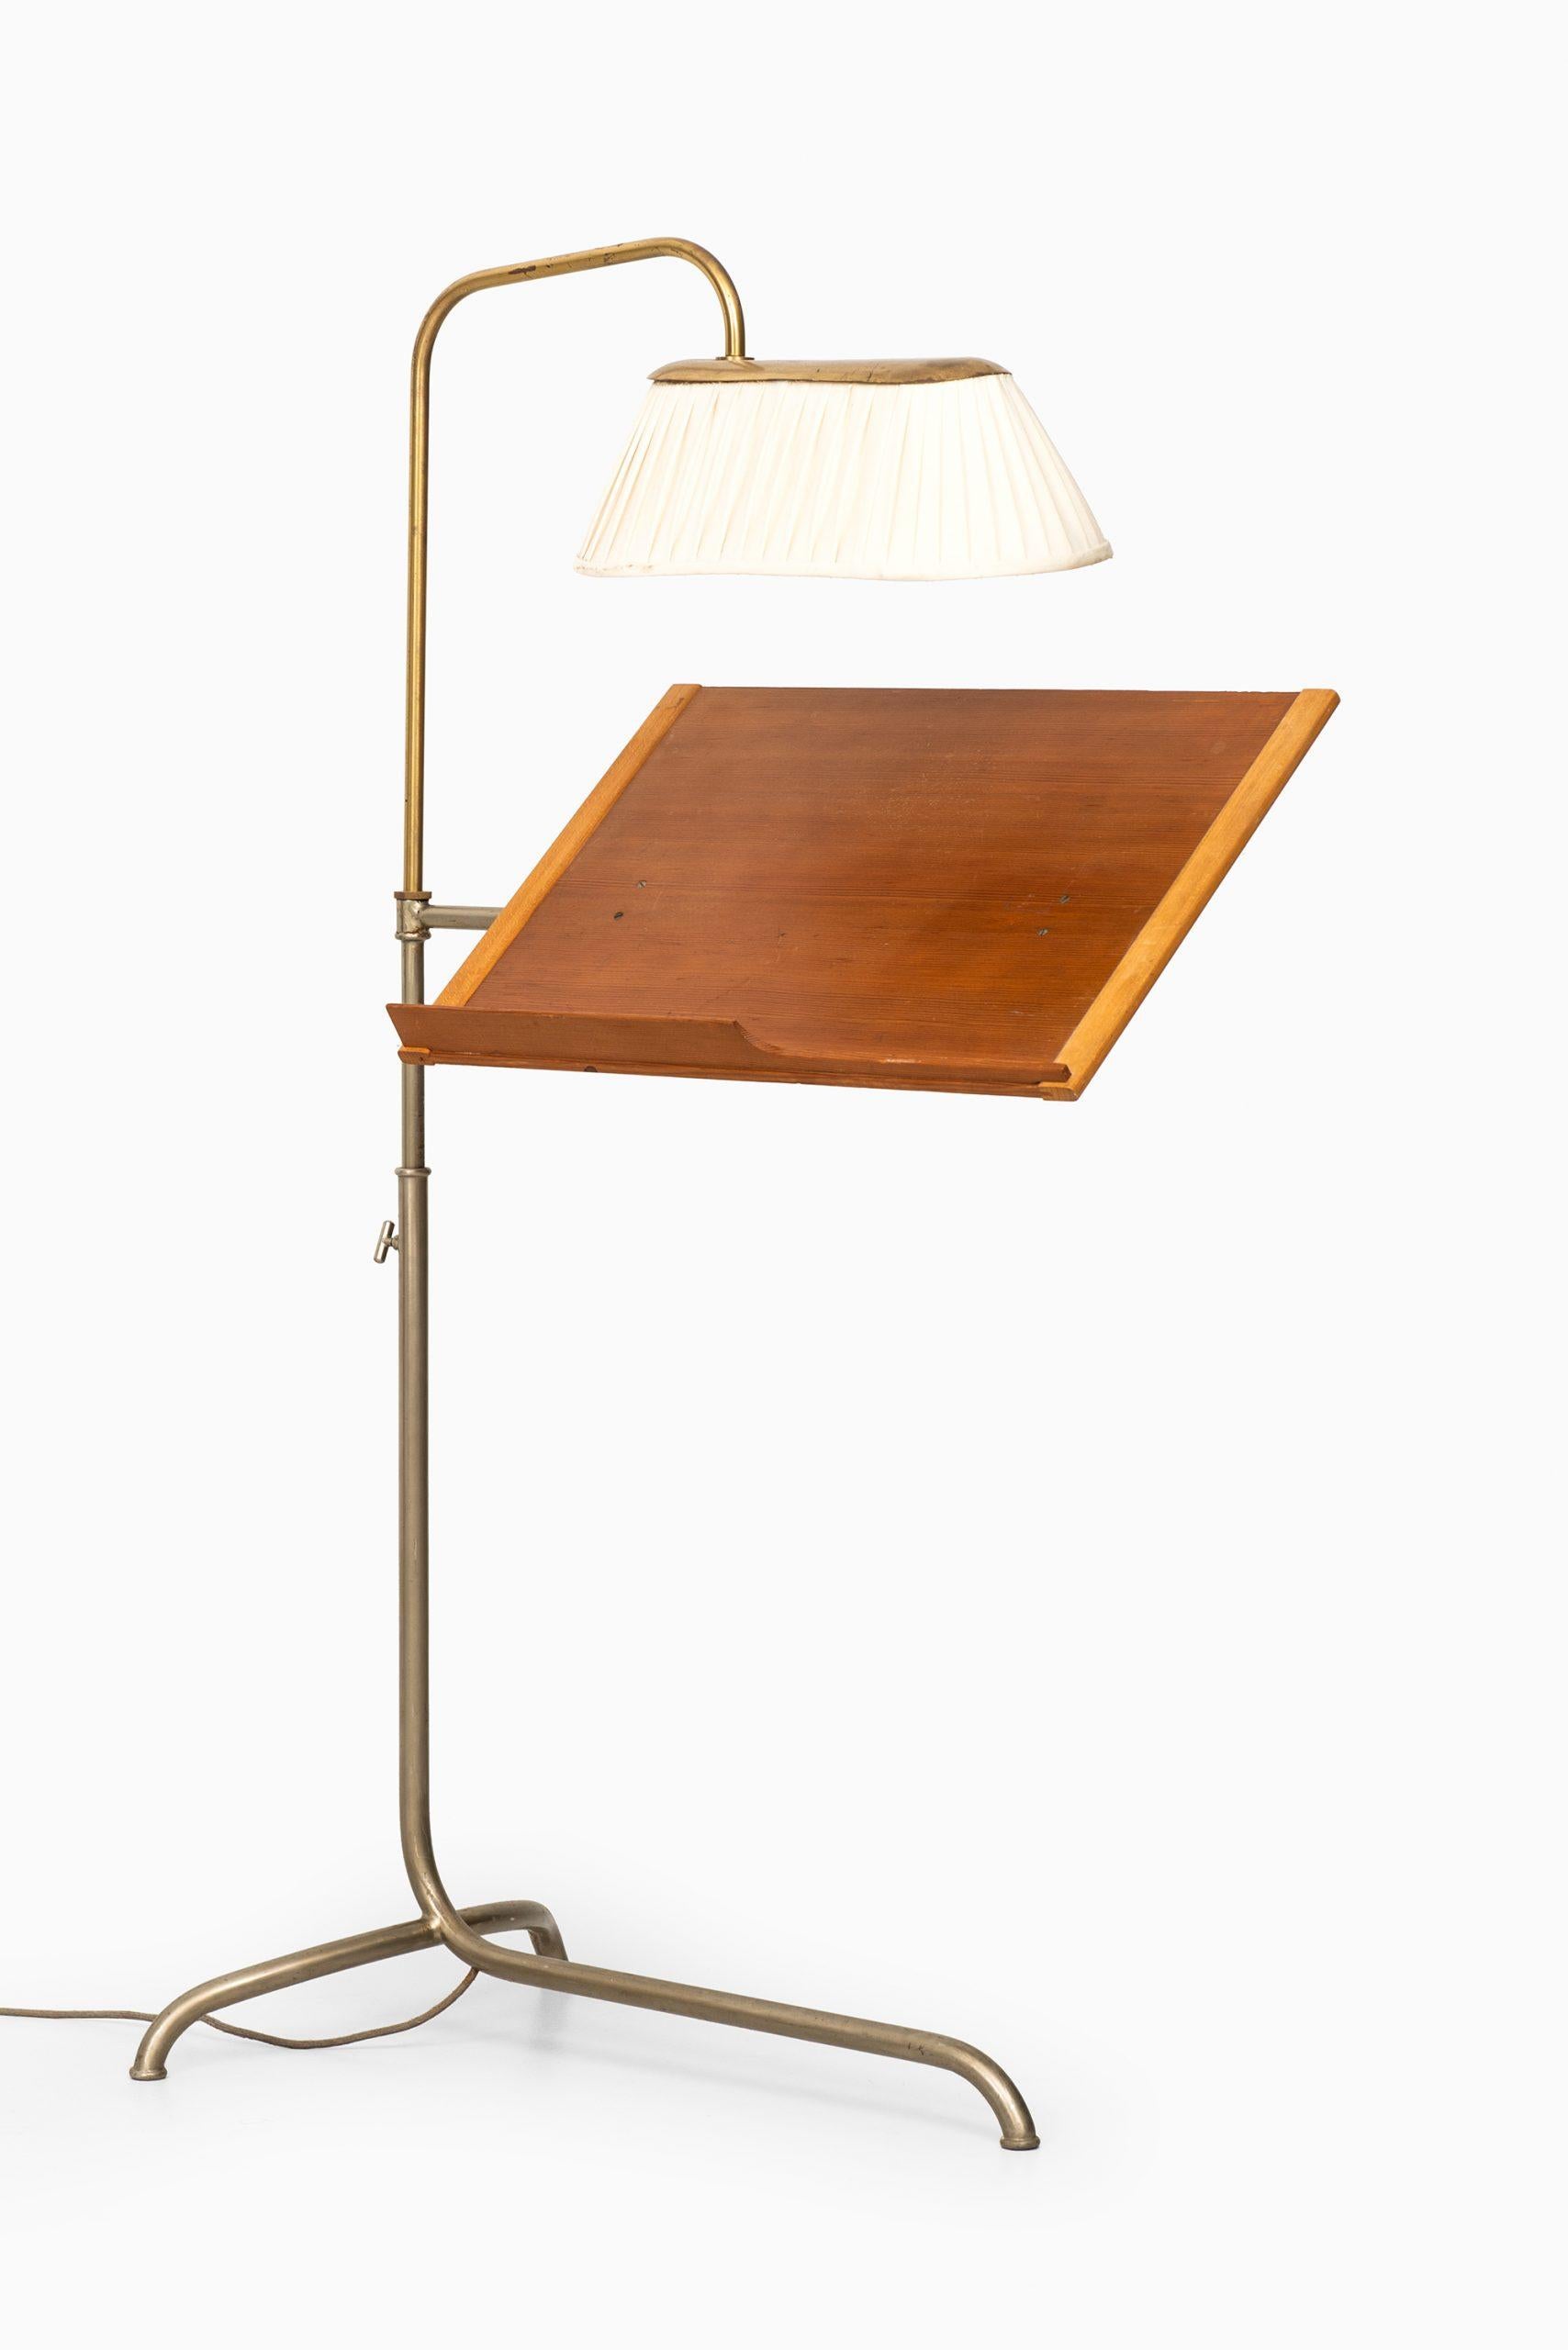 Swedish Bruno Mathsson Reading Stand Produced by Karl Mathsson in Värnamo, Sweden For Sale